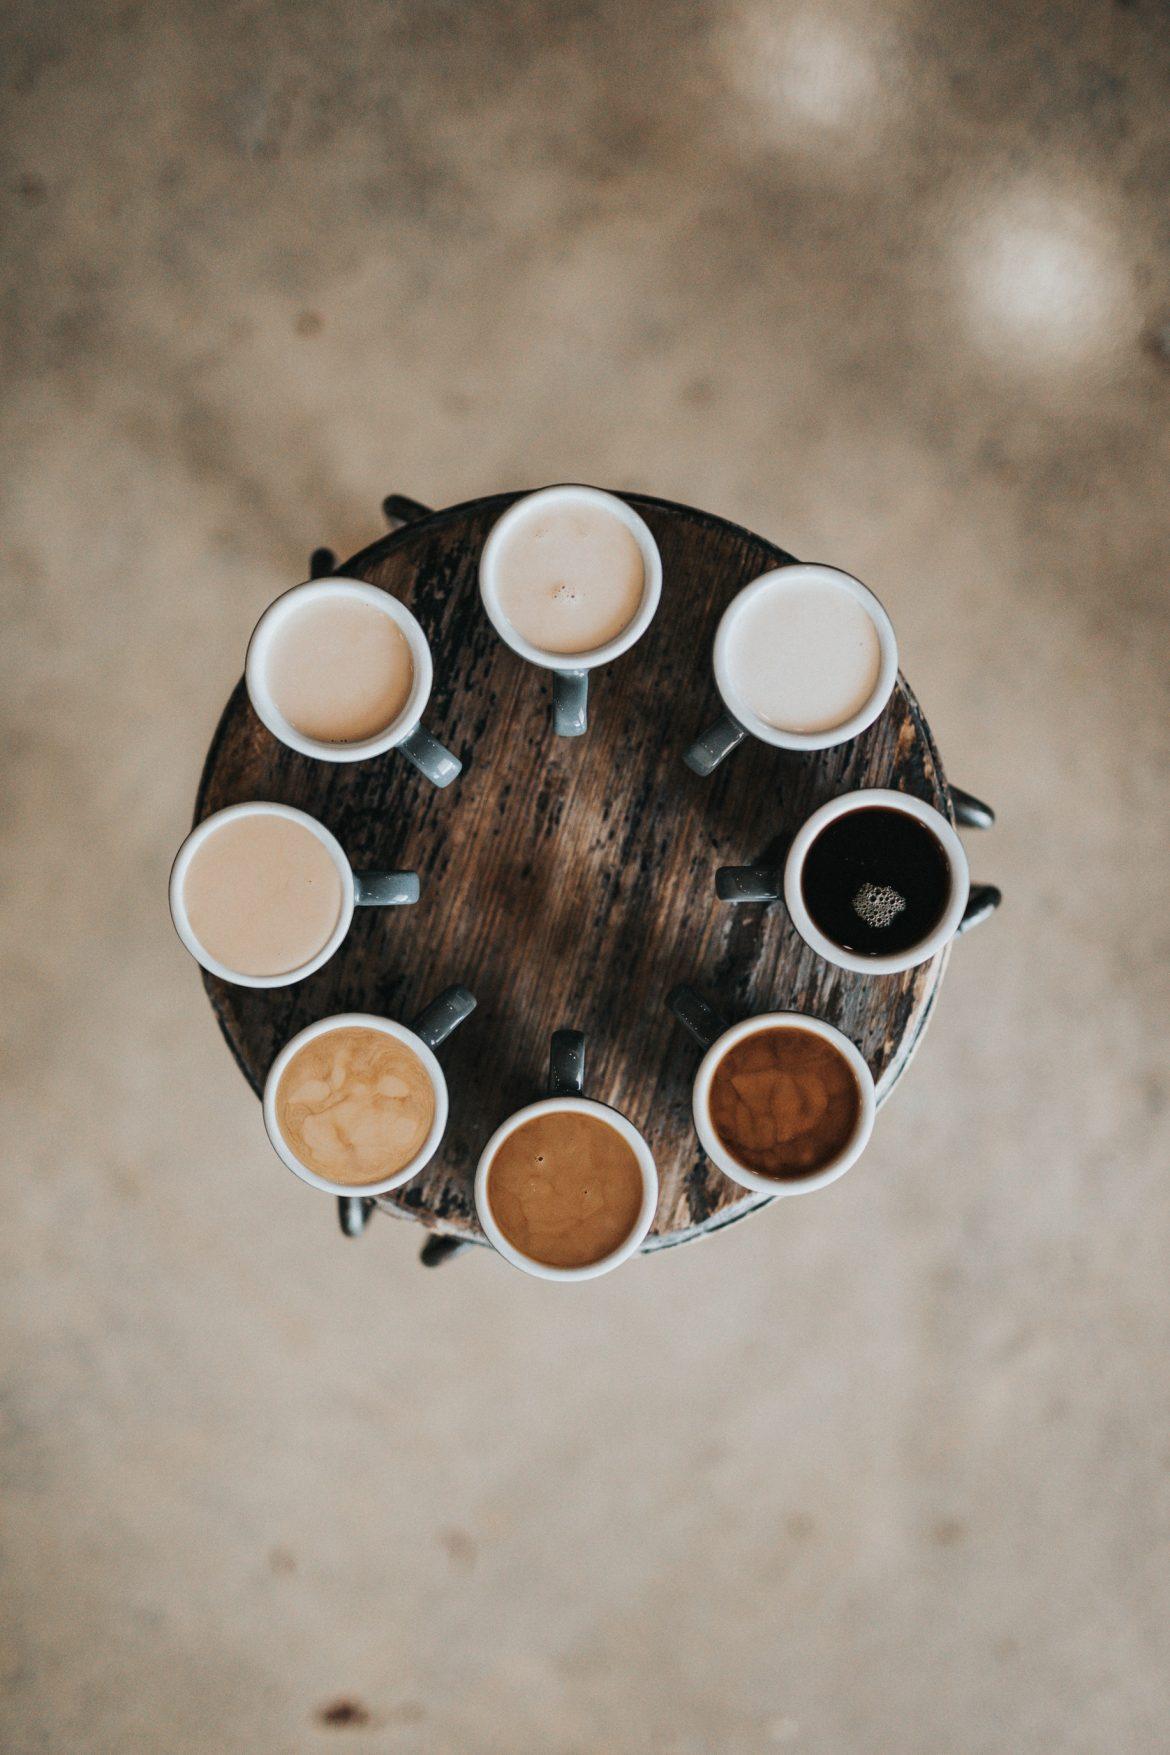 coffee at different shade ranges on a brown circular table